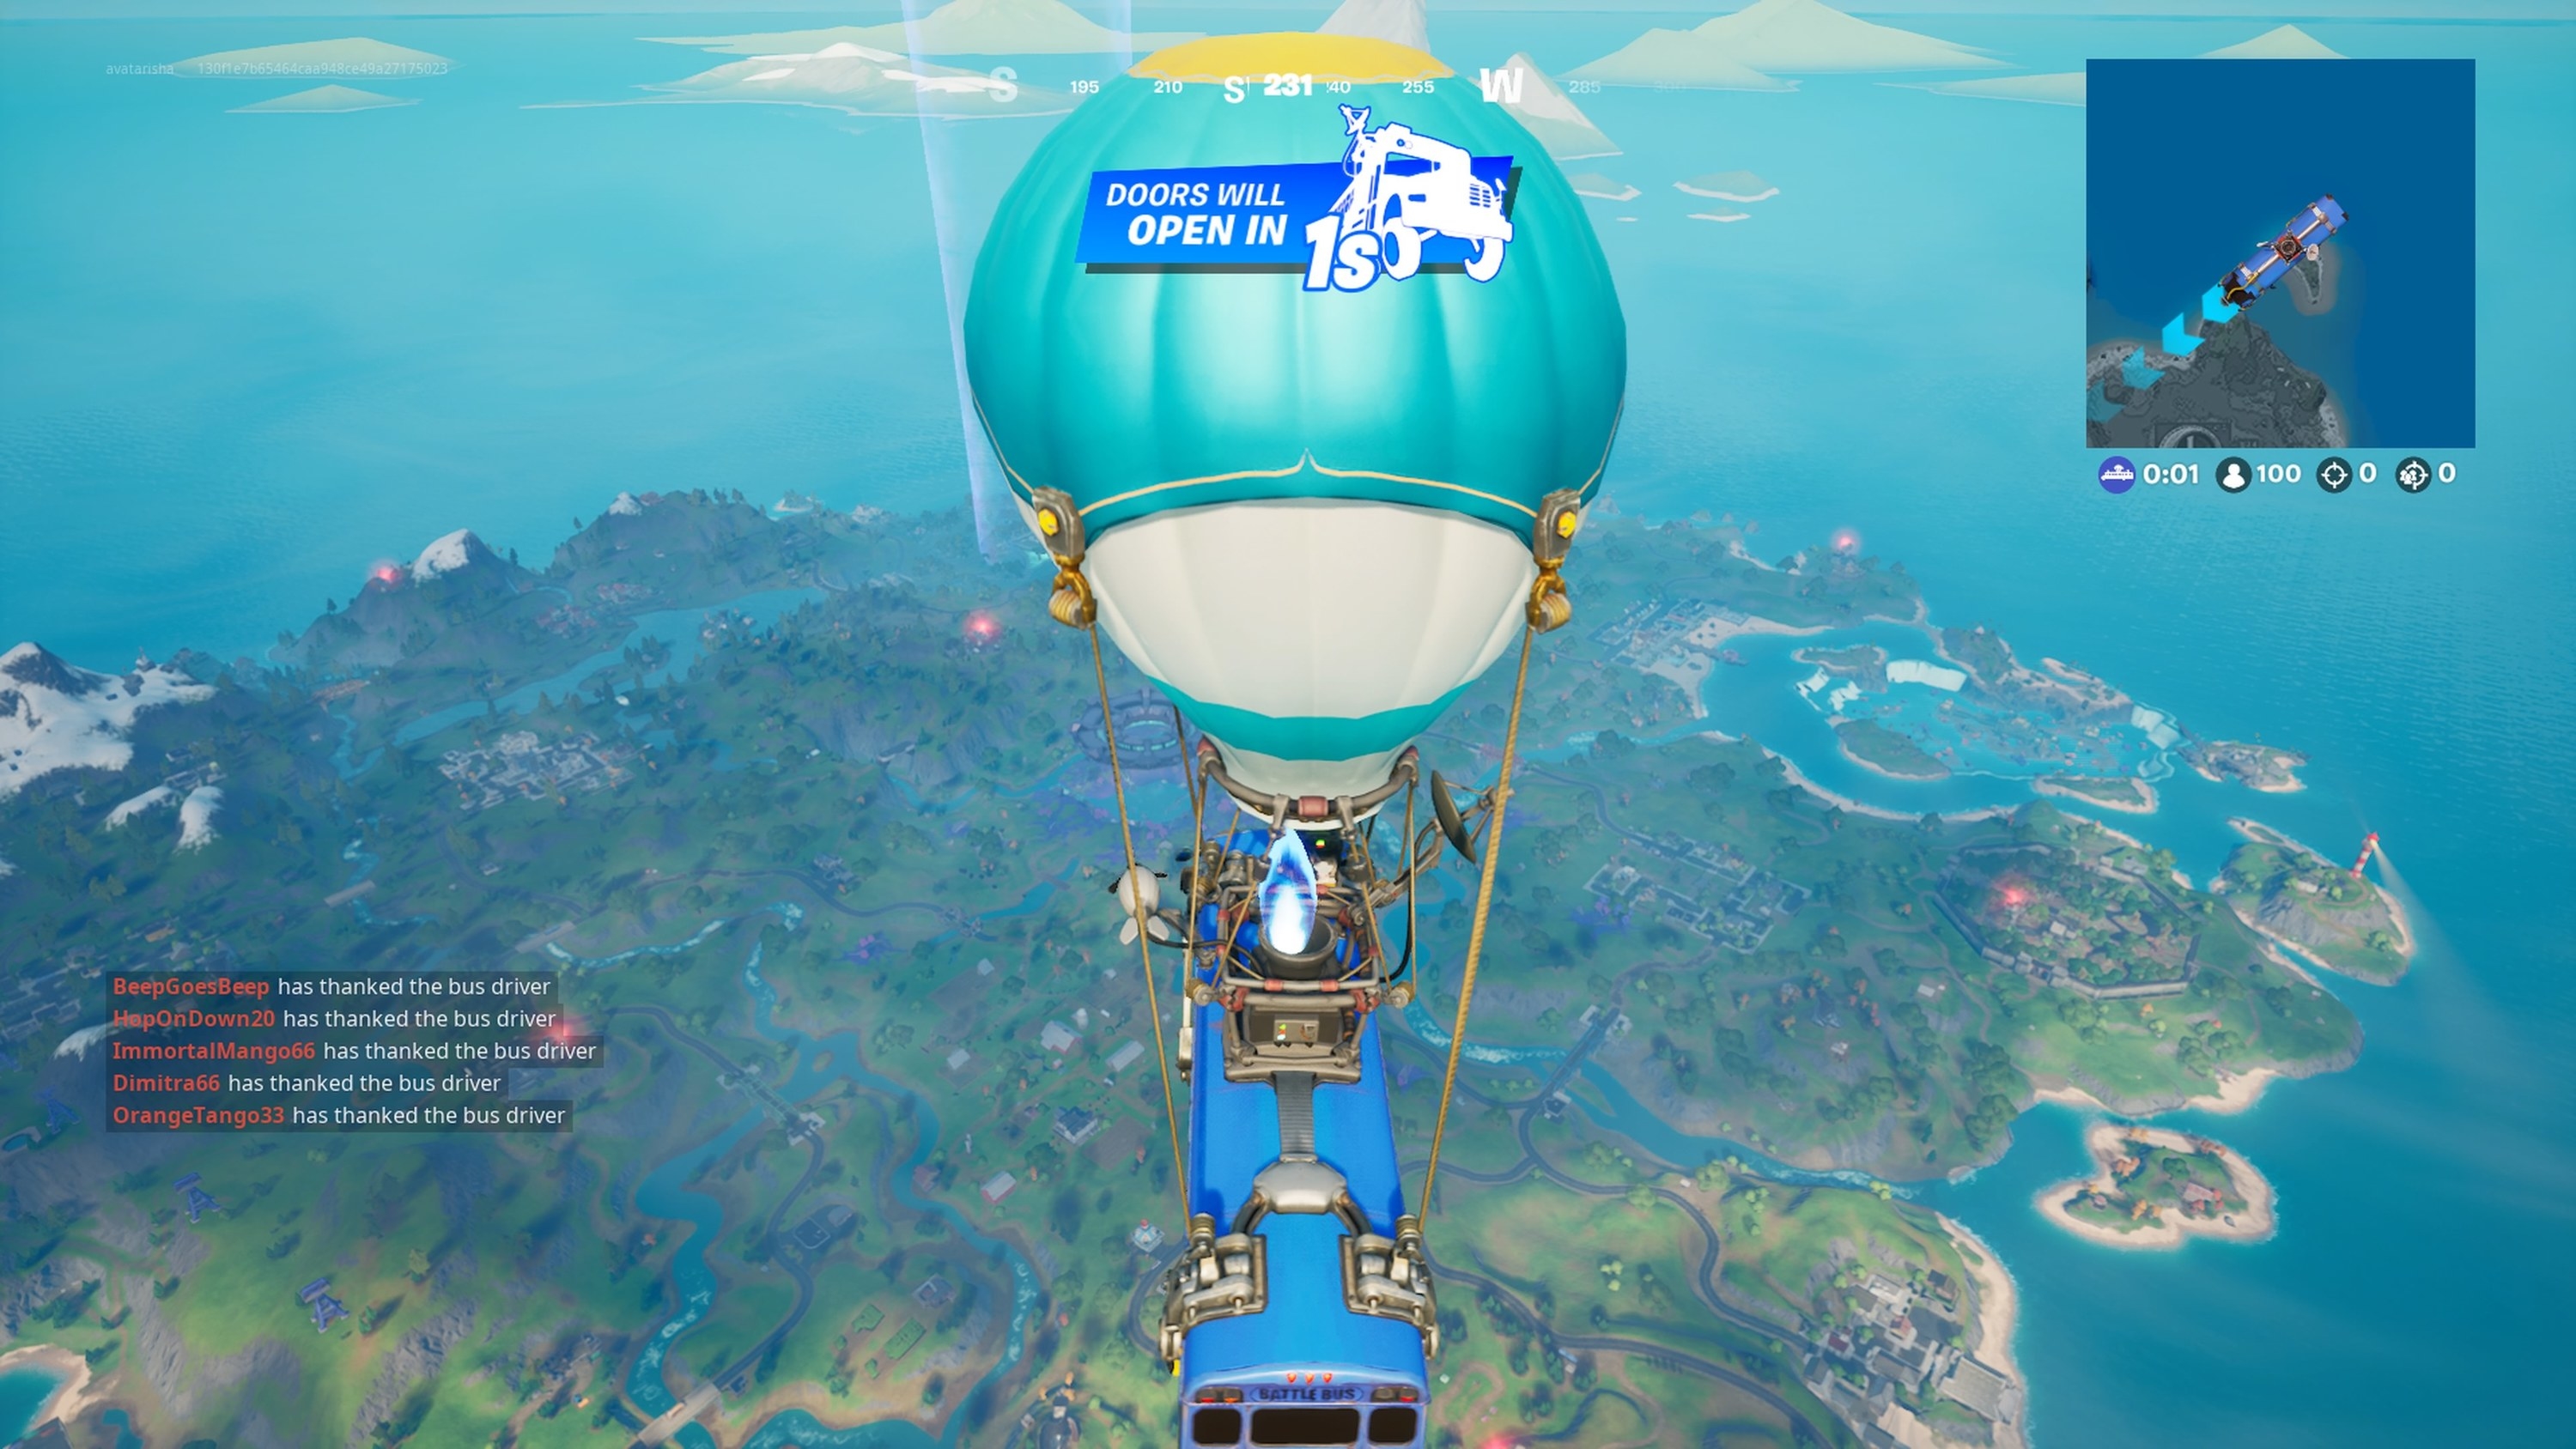 The Battle Bus in Fortnite; there is text to the side showing players thanking the bus driver